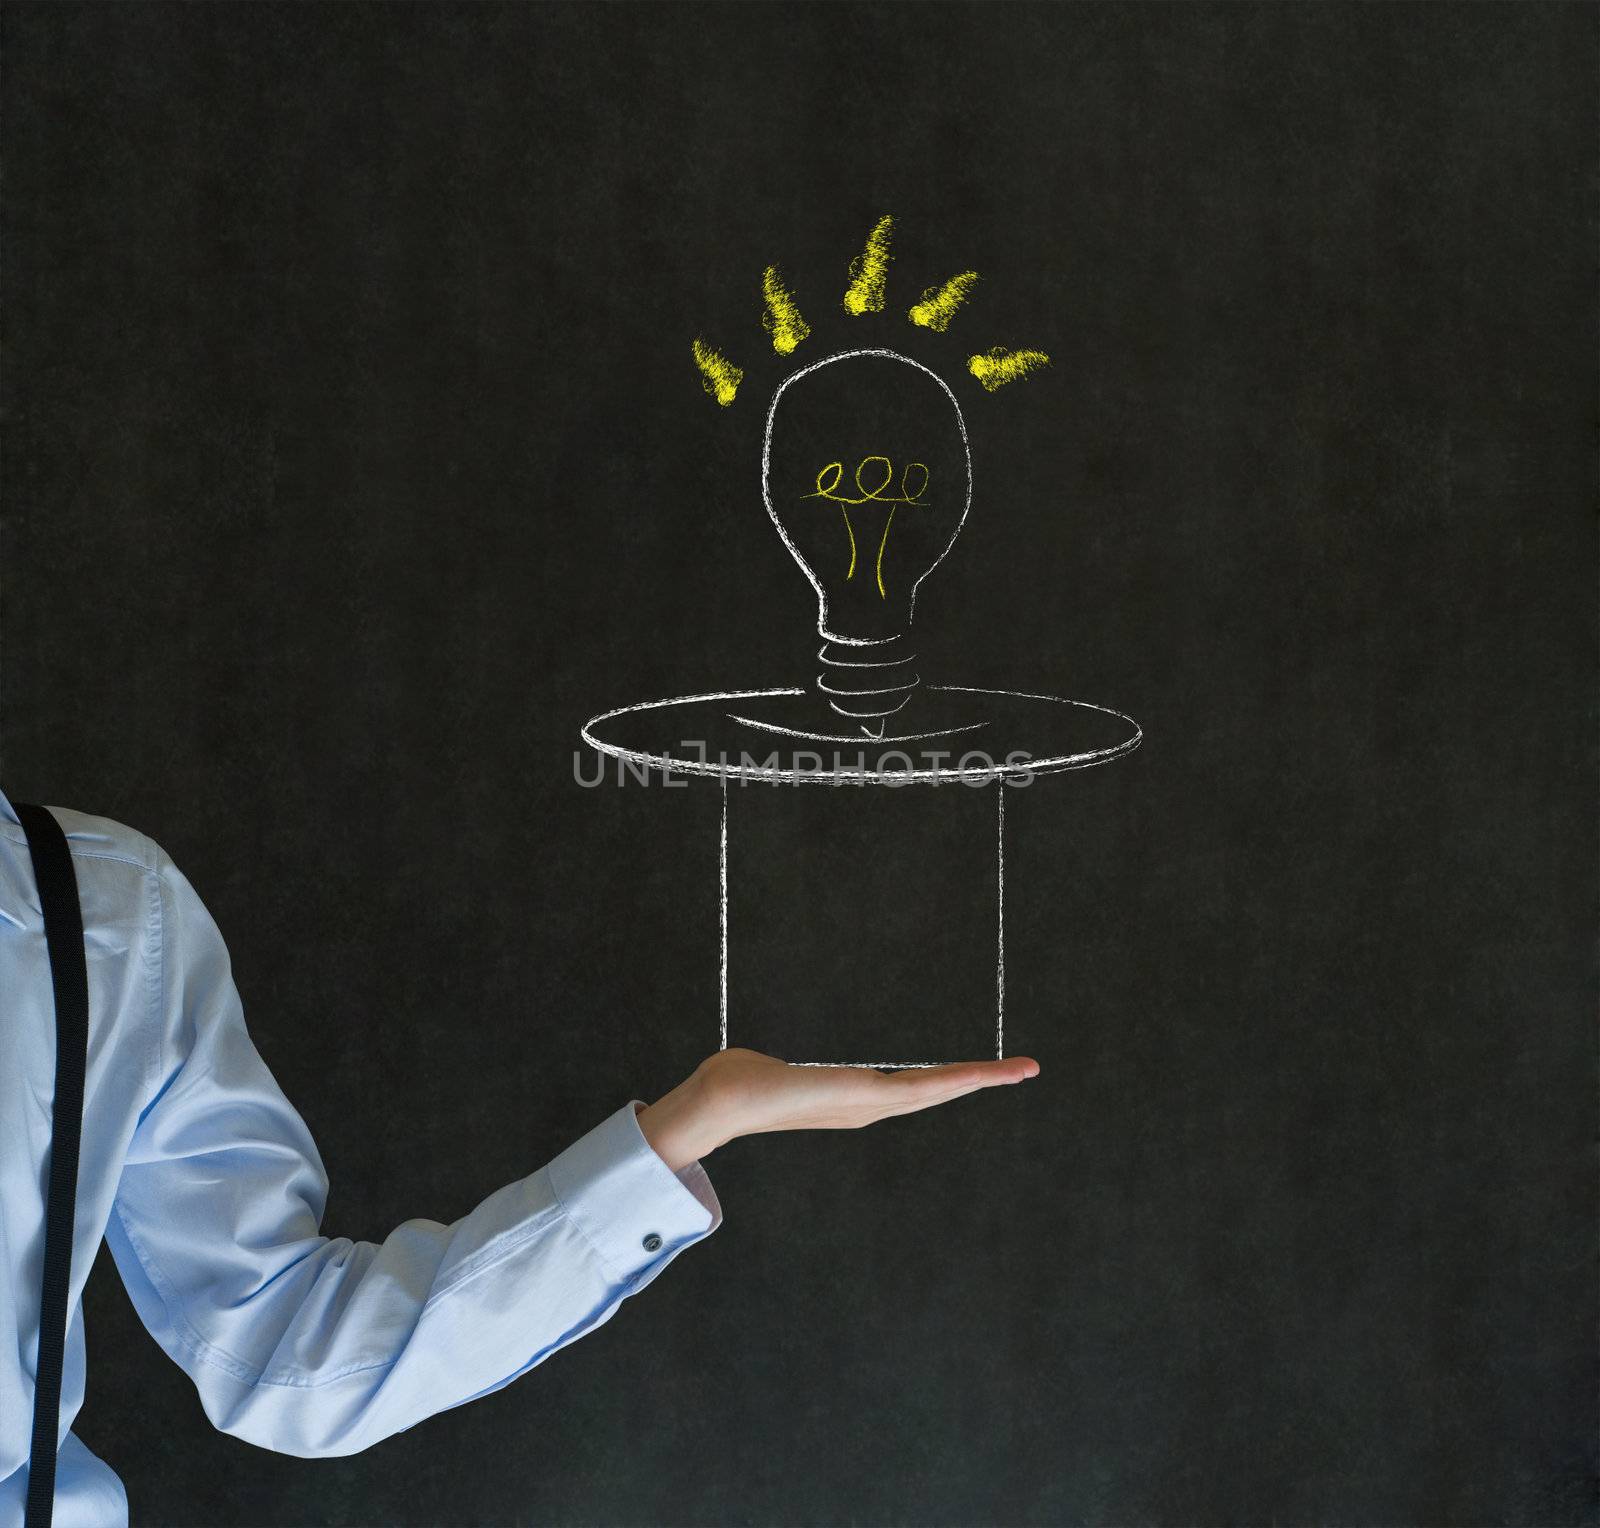 Man pulling idea from magic hat blackboard background by alistaircotton